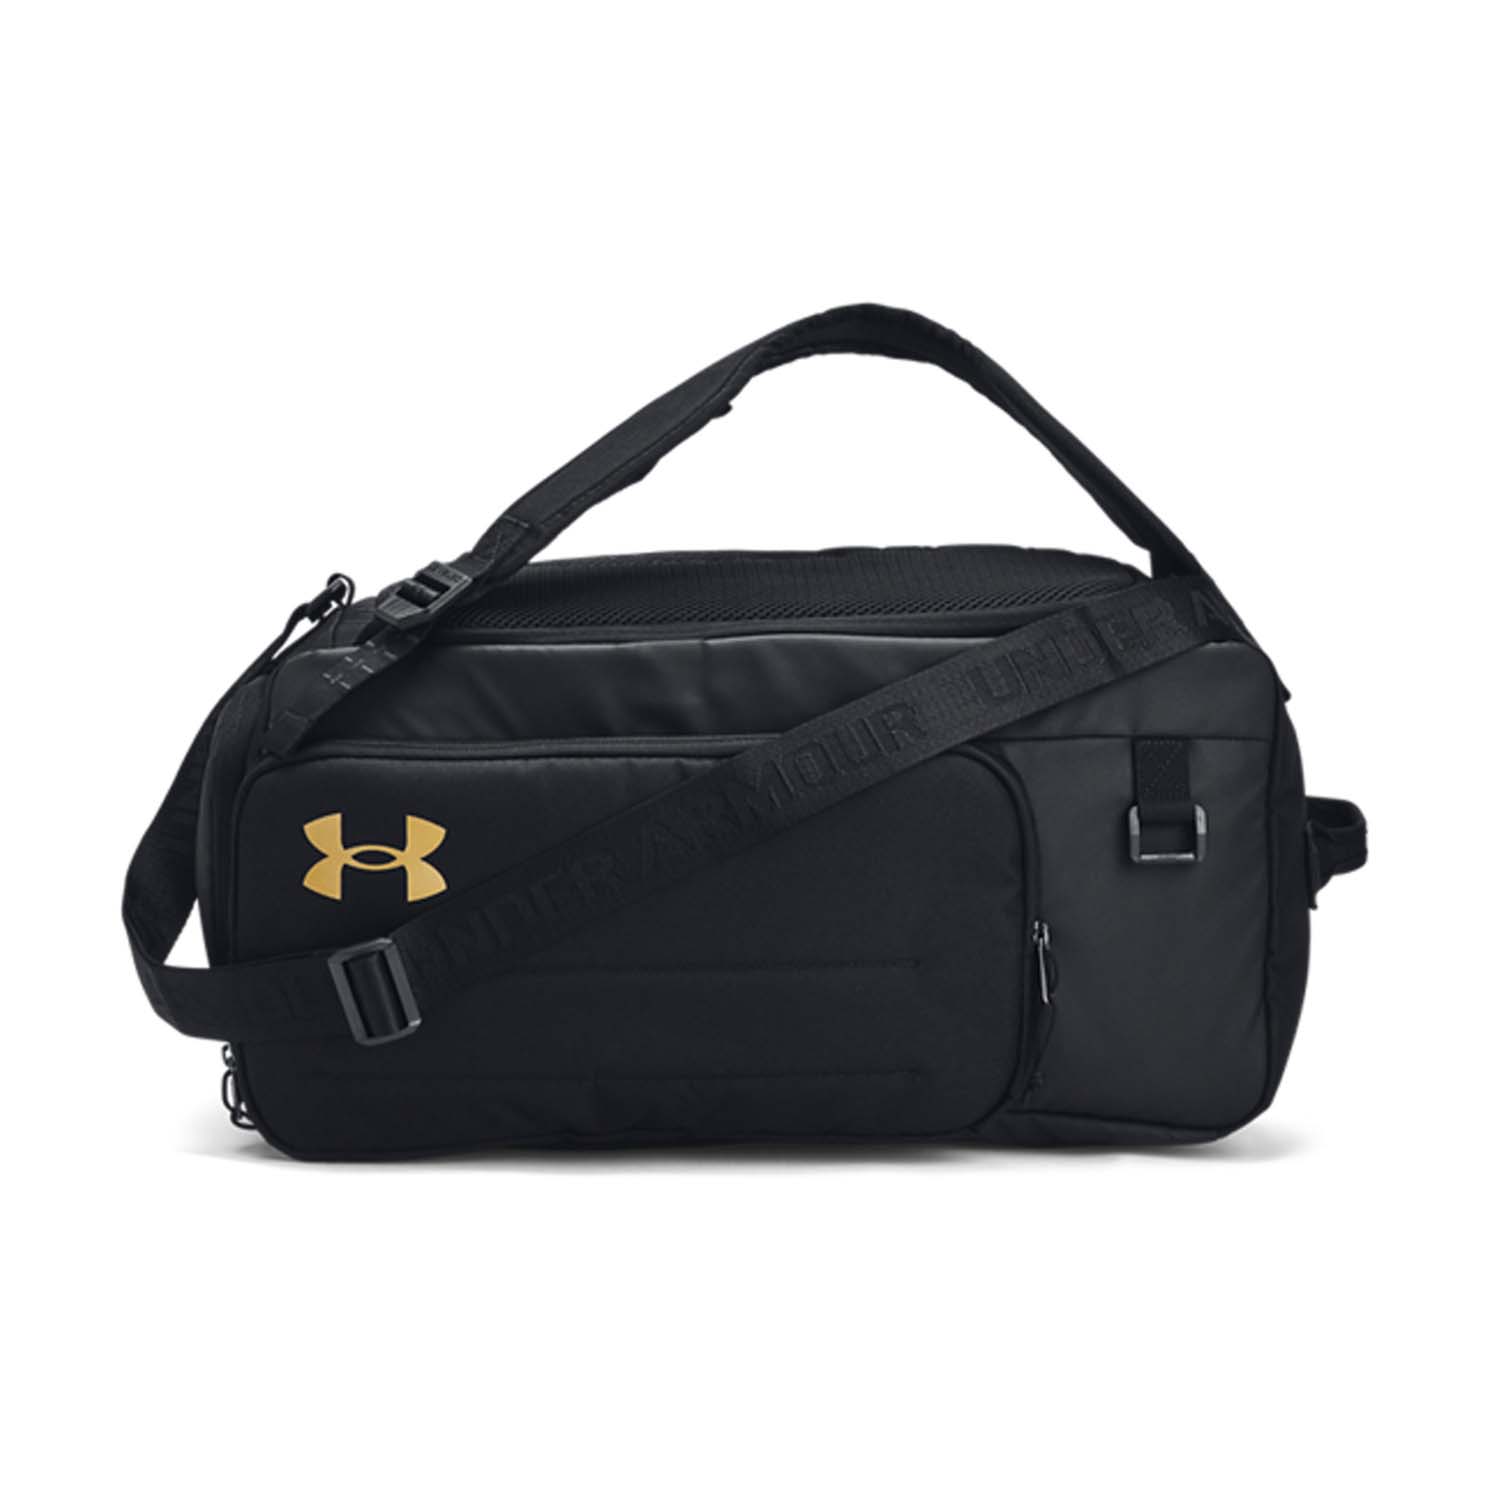 Under Armour Contain Duo Small Duffle - Black/Metallic Gold